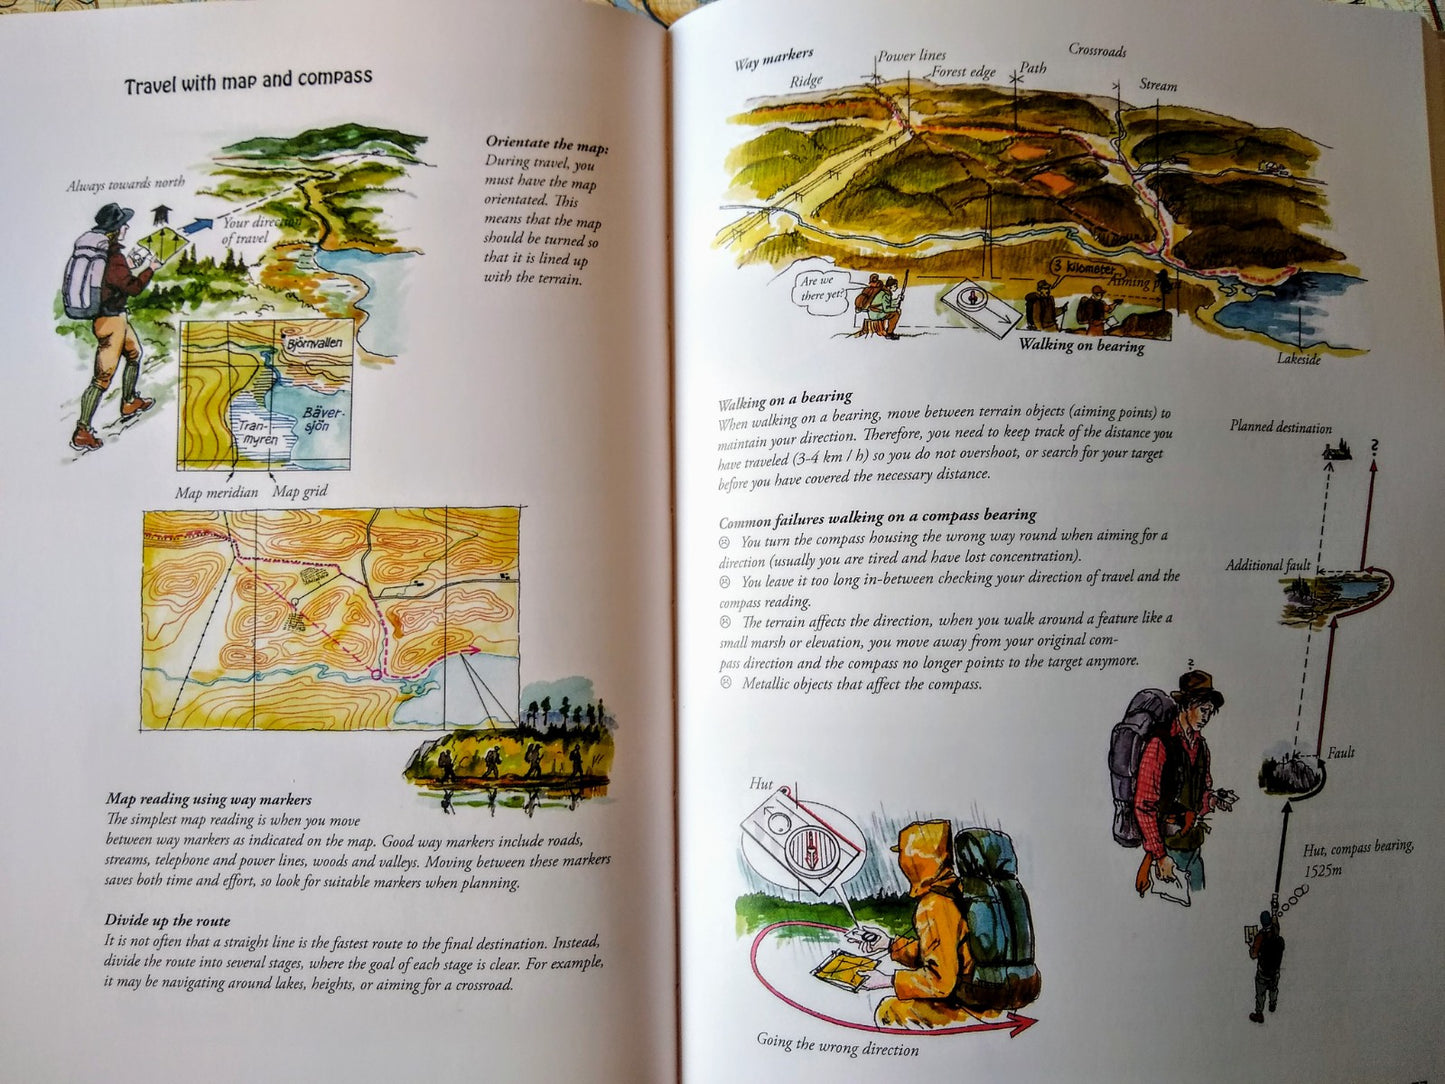 Outdoors the Scandinavian Way by Lars Fält - sample page on navigation with a compass.